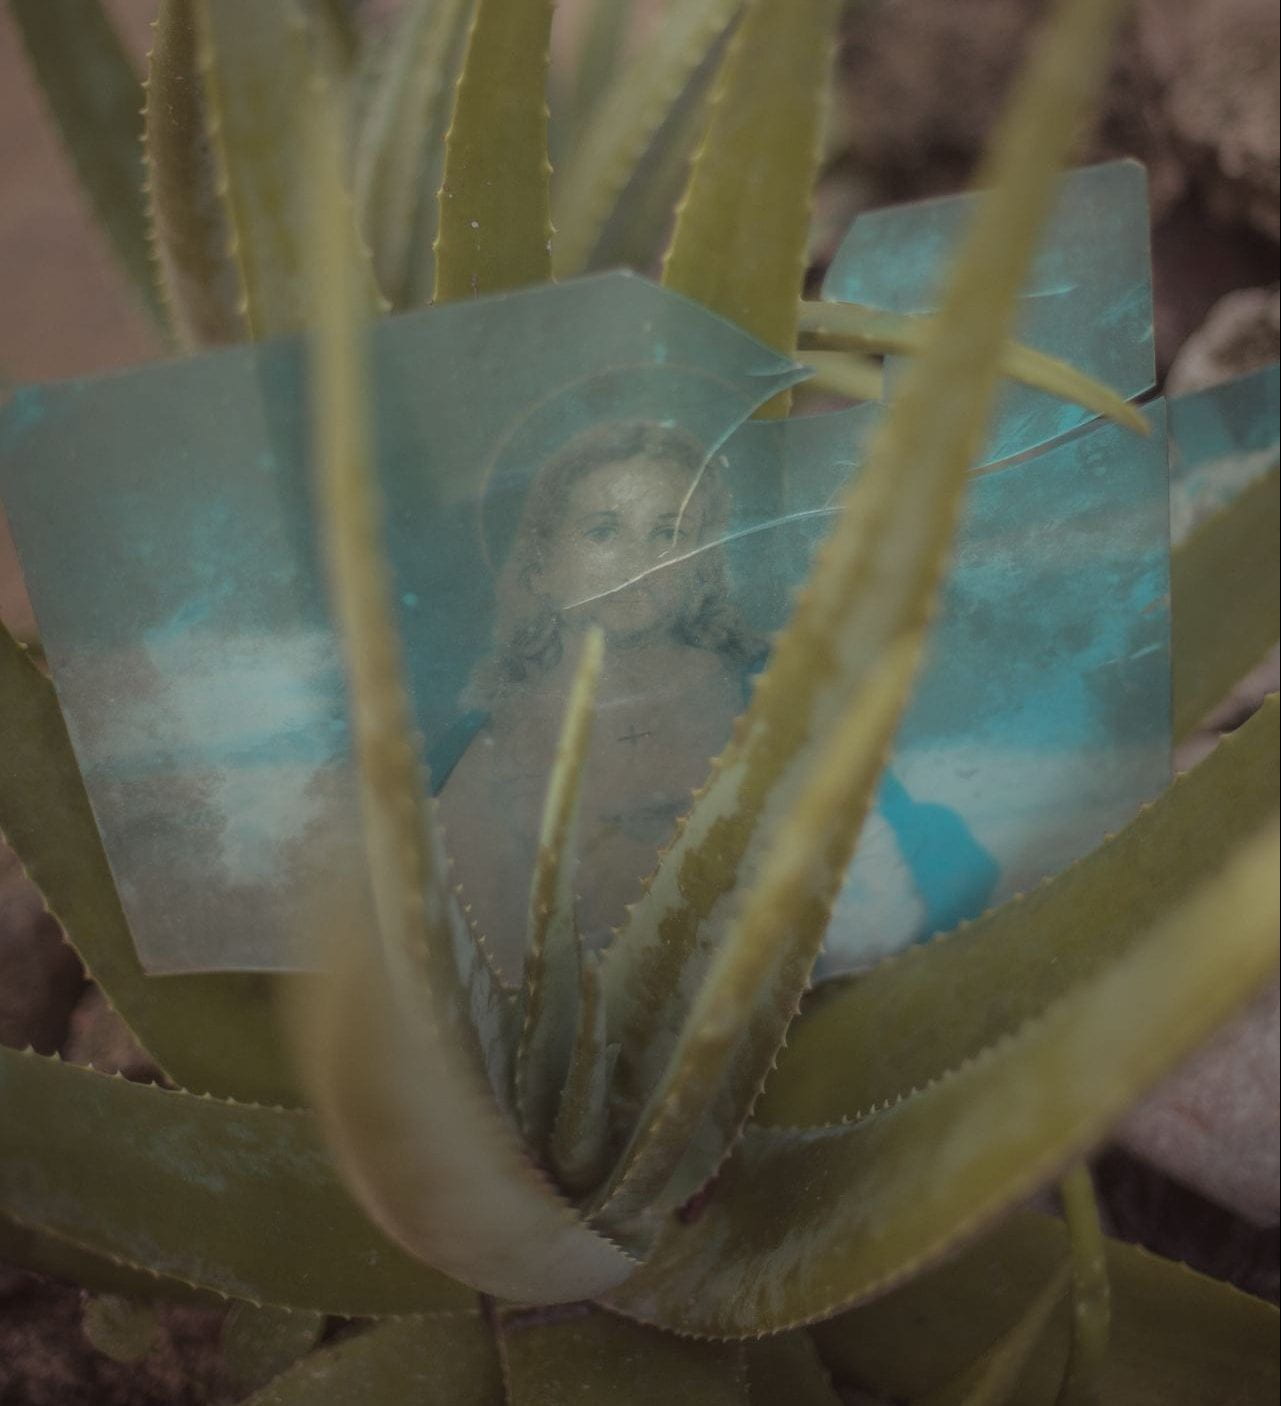 An aloe plant holds among its spines a weathered print depicting Jesus.